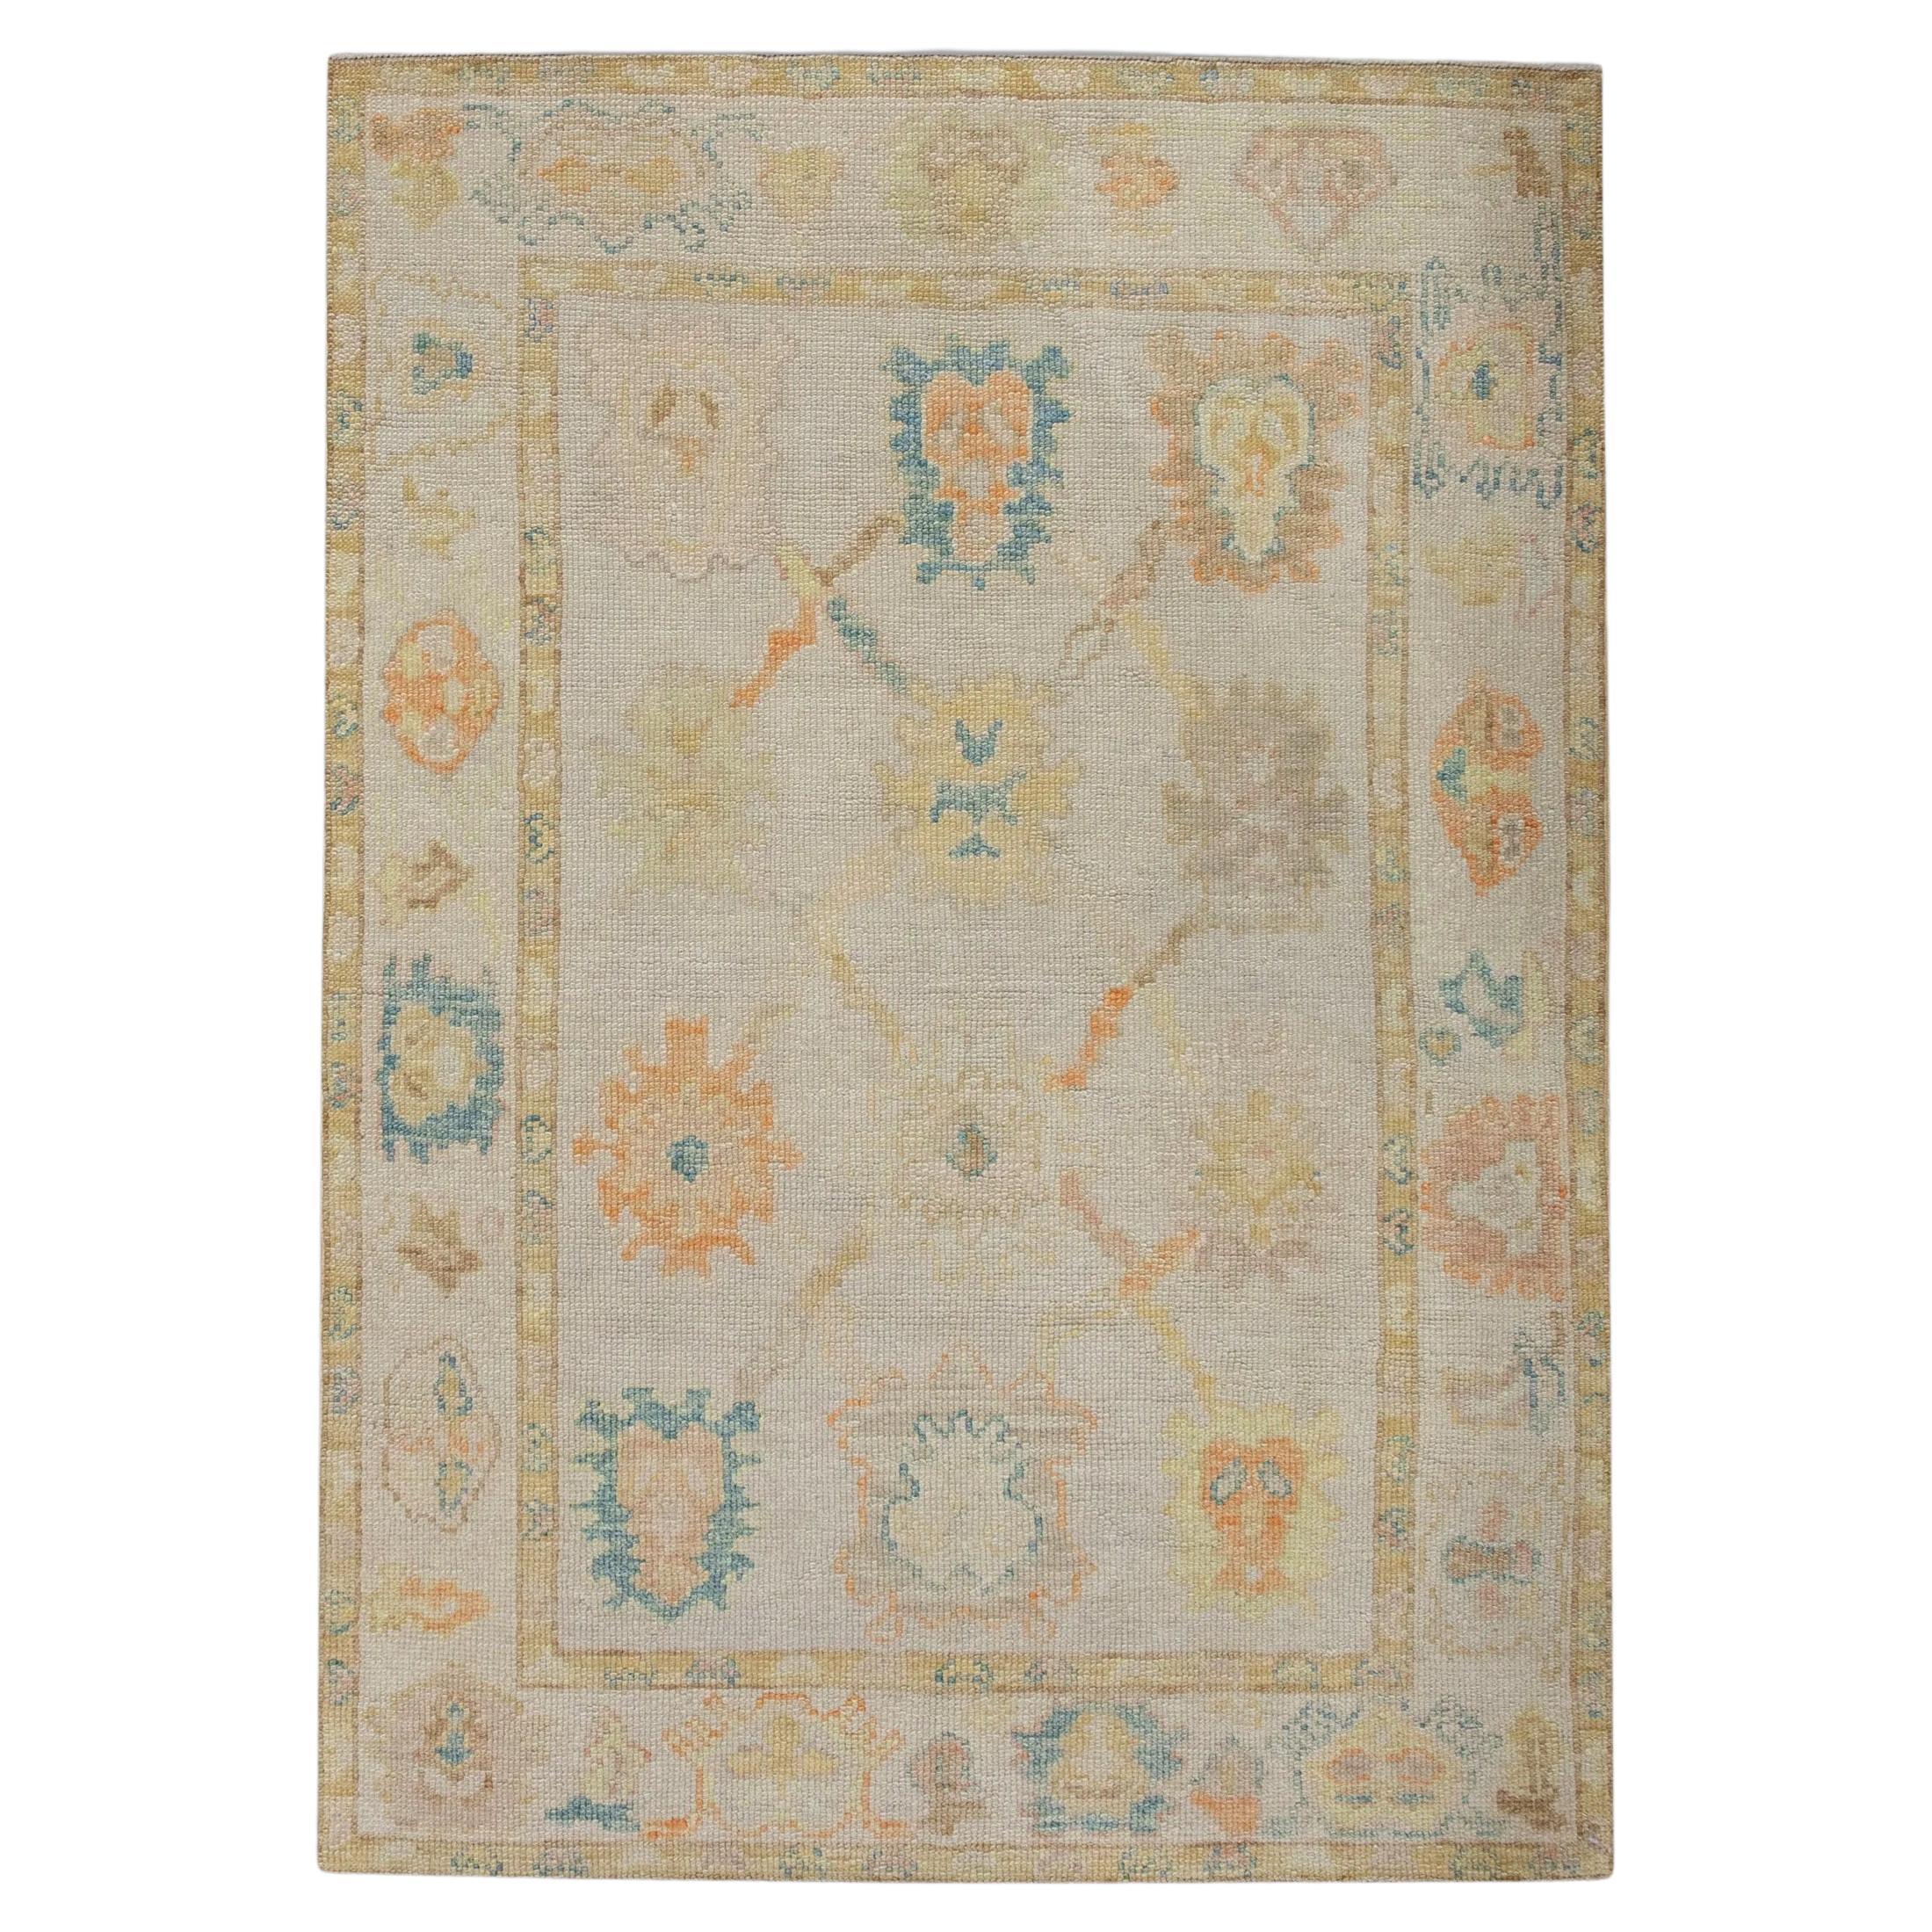 Handwoven Wool Turkish Oushak Rug w/ Colorful Pastel Floral Design 3'11" x 5'6" For Sale